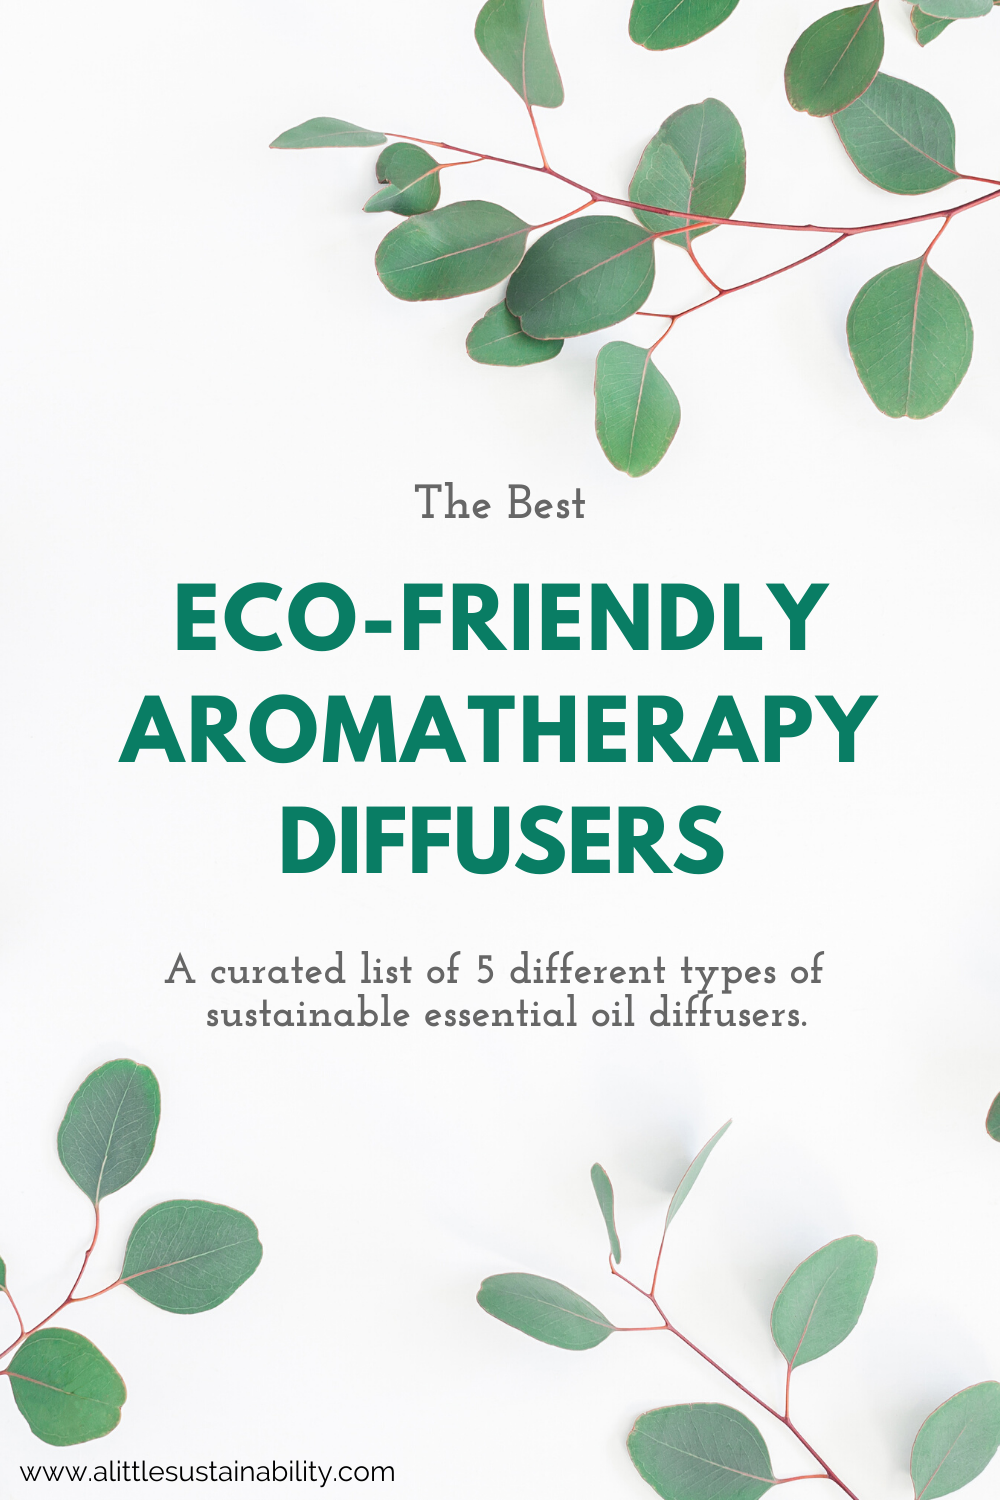 A curated list of the best eco-friendly aromatherapy essential oils diffusers. 5 different types of diffusers with 15 total diffusers listed. Natural Stone Diffusers, Reed diffusers, candle oil burning diffusers, nebulizers and ultra sonic